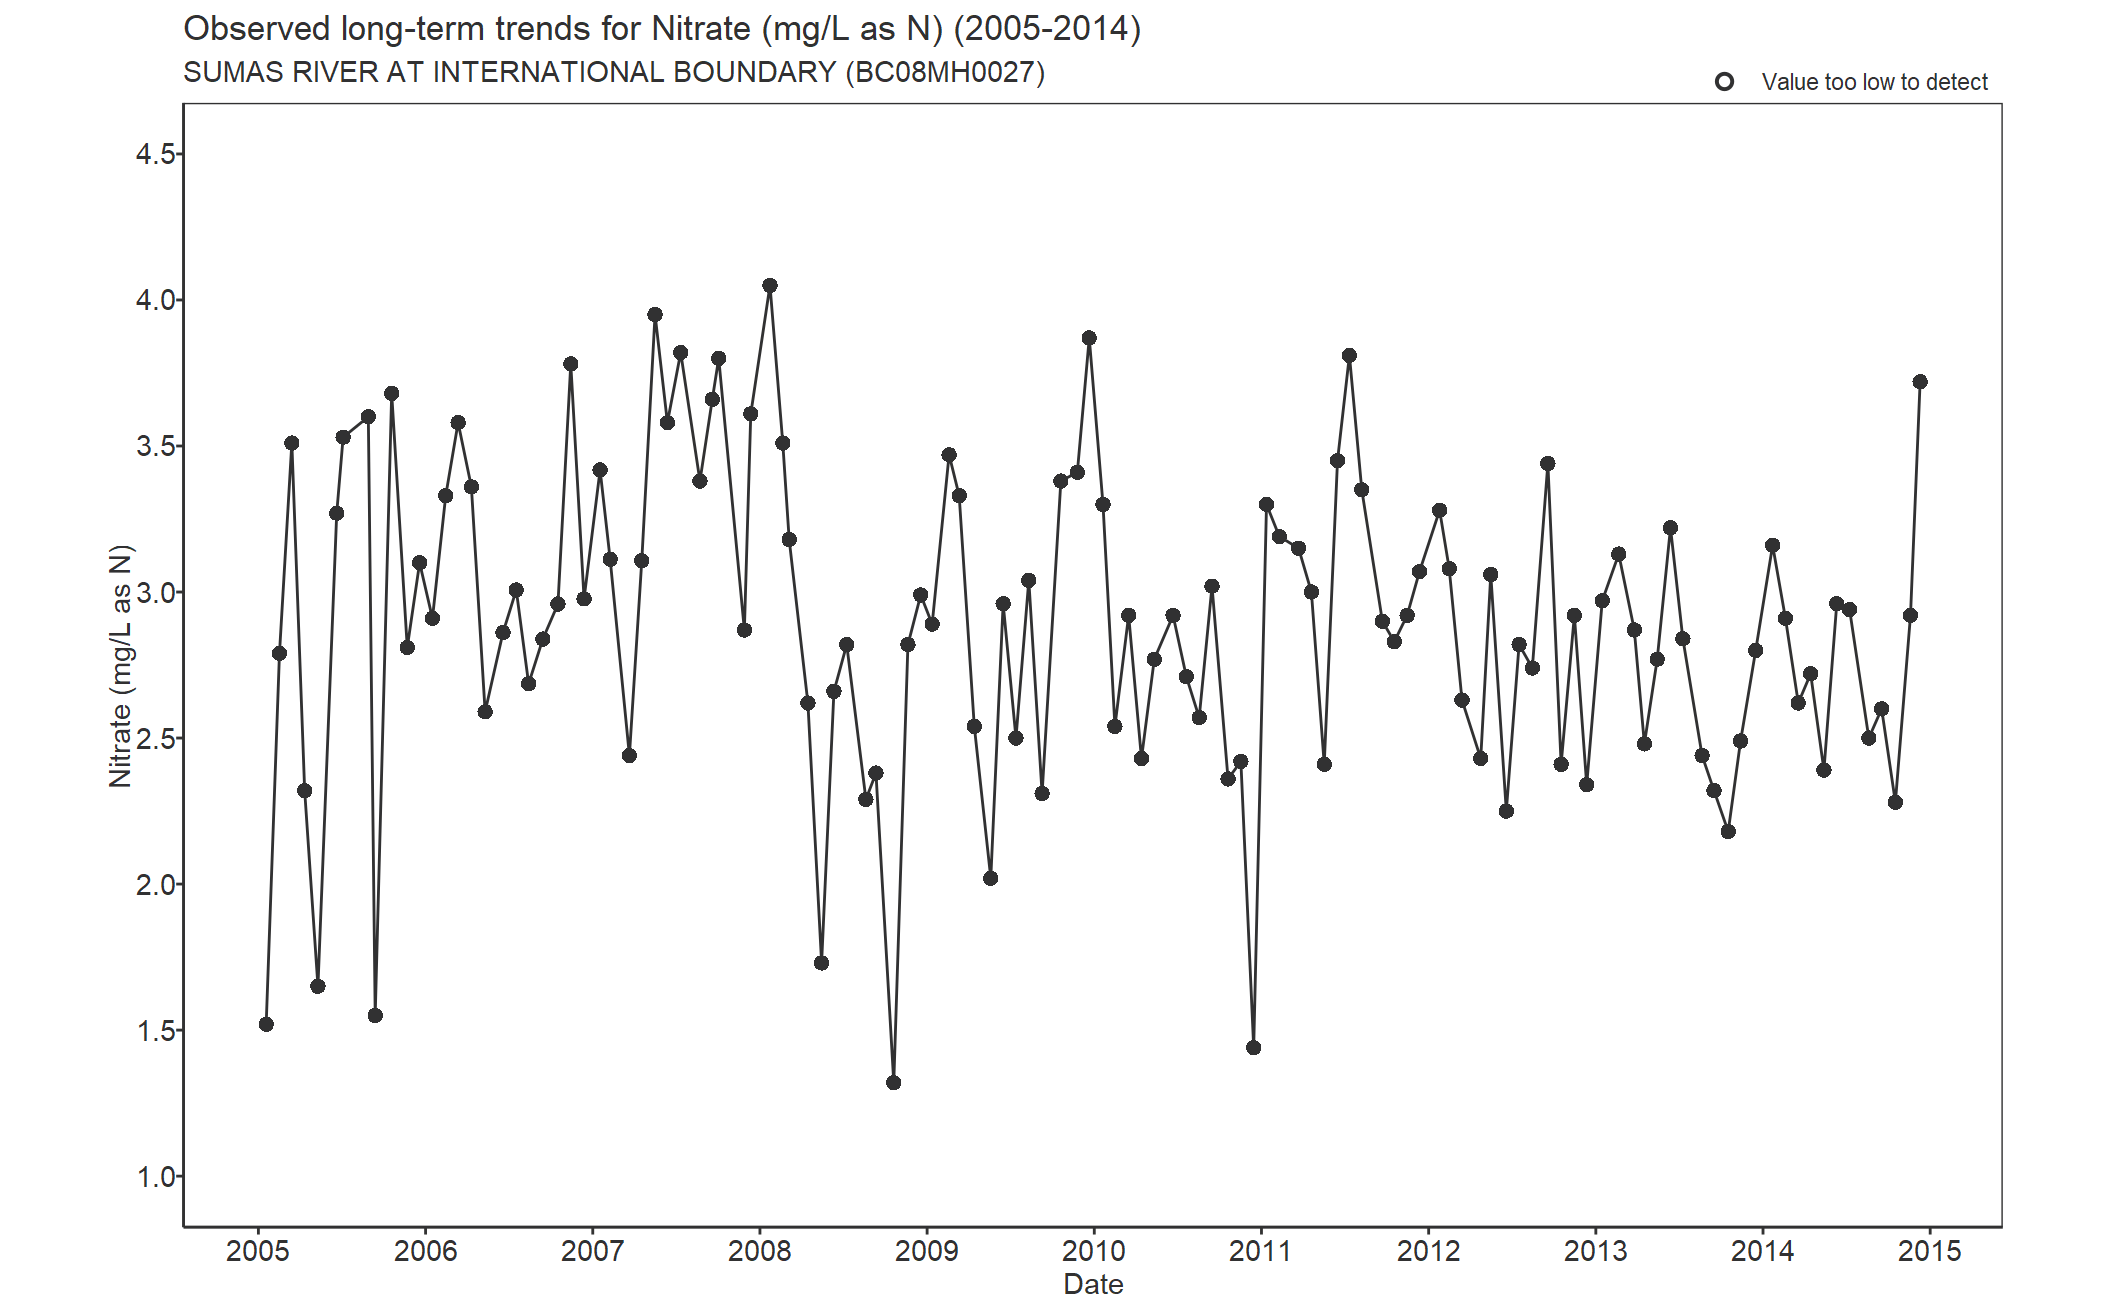 Observed long-term trends for Nitrate (2005-2014)